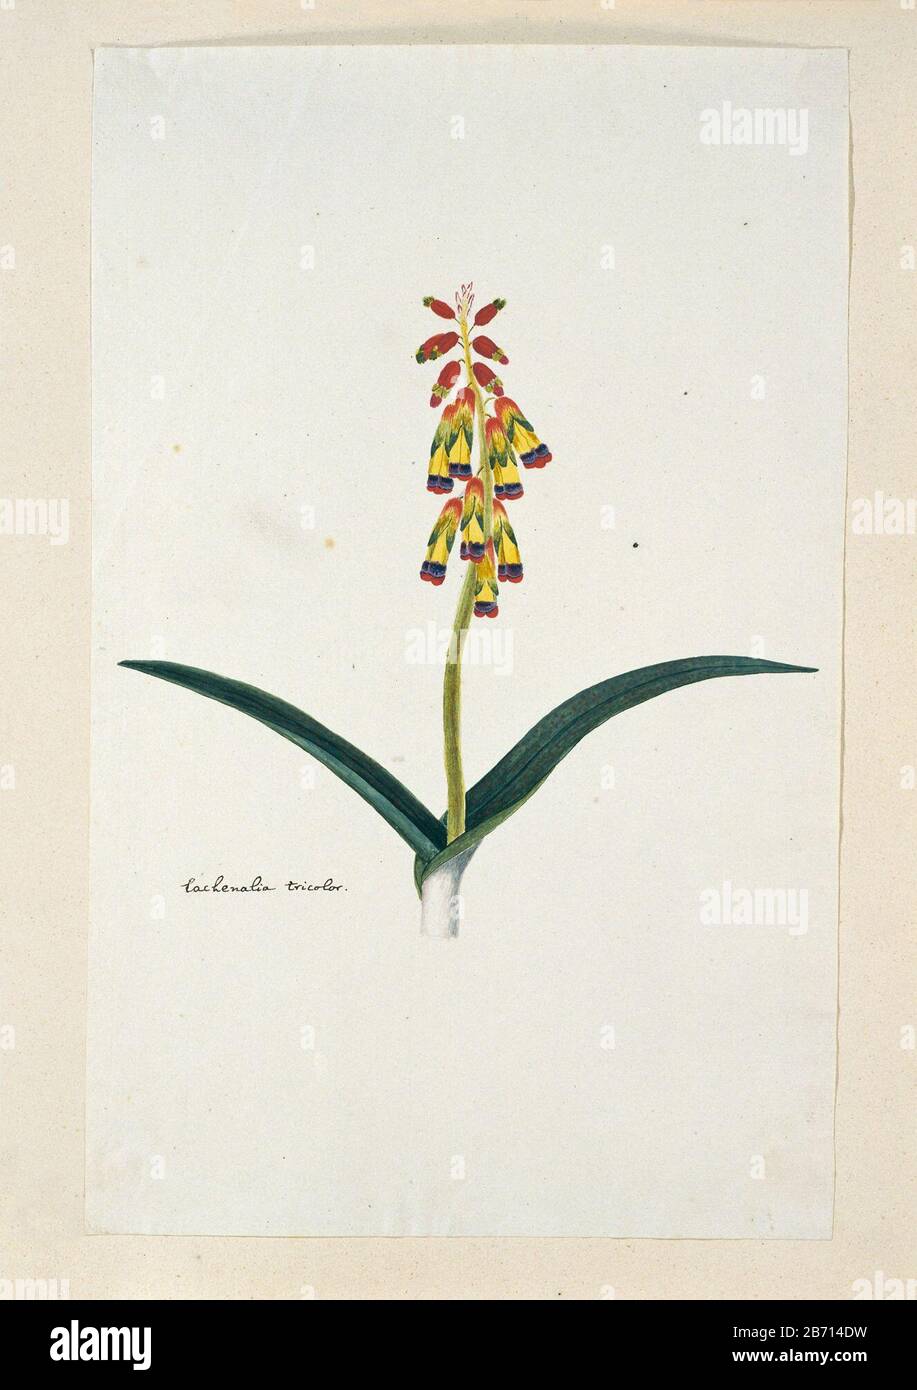 Lachenalia aloides (Lf) Engl var quadricolor Lachenalia tricolor (titel op object) Lachenalia aloides (L. F.) Engl. var. quadricolor.Lachenalia tricolor (title object) Property Type: album drawing sheet Item number: RP-T-1914-18-40 Inscriptions / Brands: annotation, left representation, pen in brown: 'Lachenalia tricolor.' (Gordon's handwriting) Description: Lachenalia aloides (Lf) Engl. var. quadricolor. Manufacturer : artist: Robert Jacob Gordon Date: Oct 1777 - mar-1786 Physical features: brush in watercolor in colors, pencil and black chalk, brush in body color, pen and ink material: paper Stock Photo